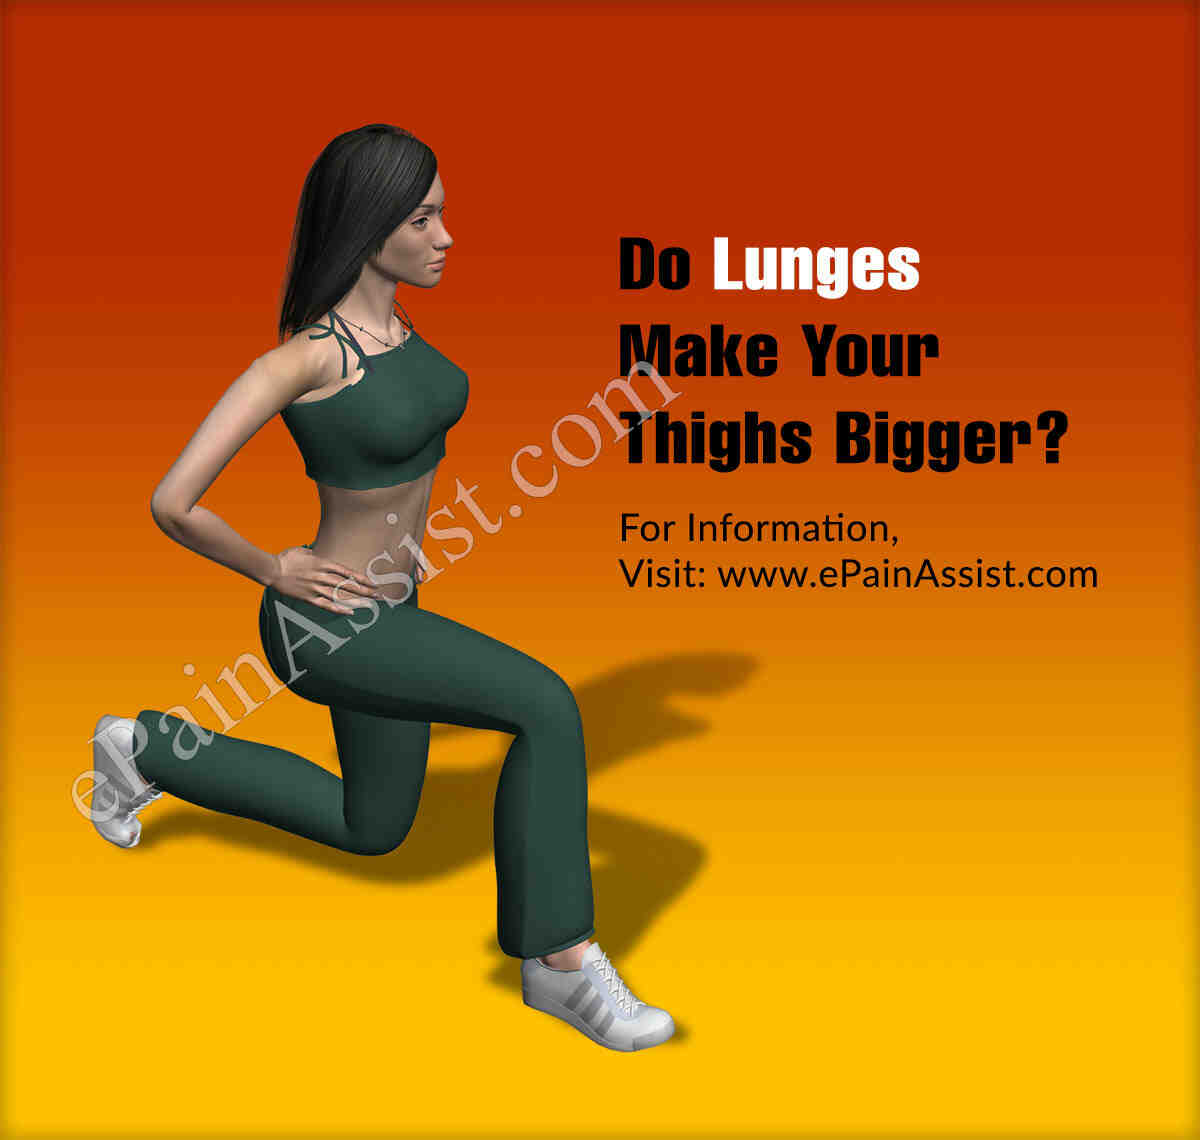 Will lunges make my thighs bigger?